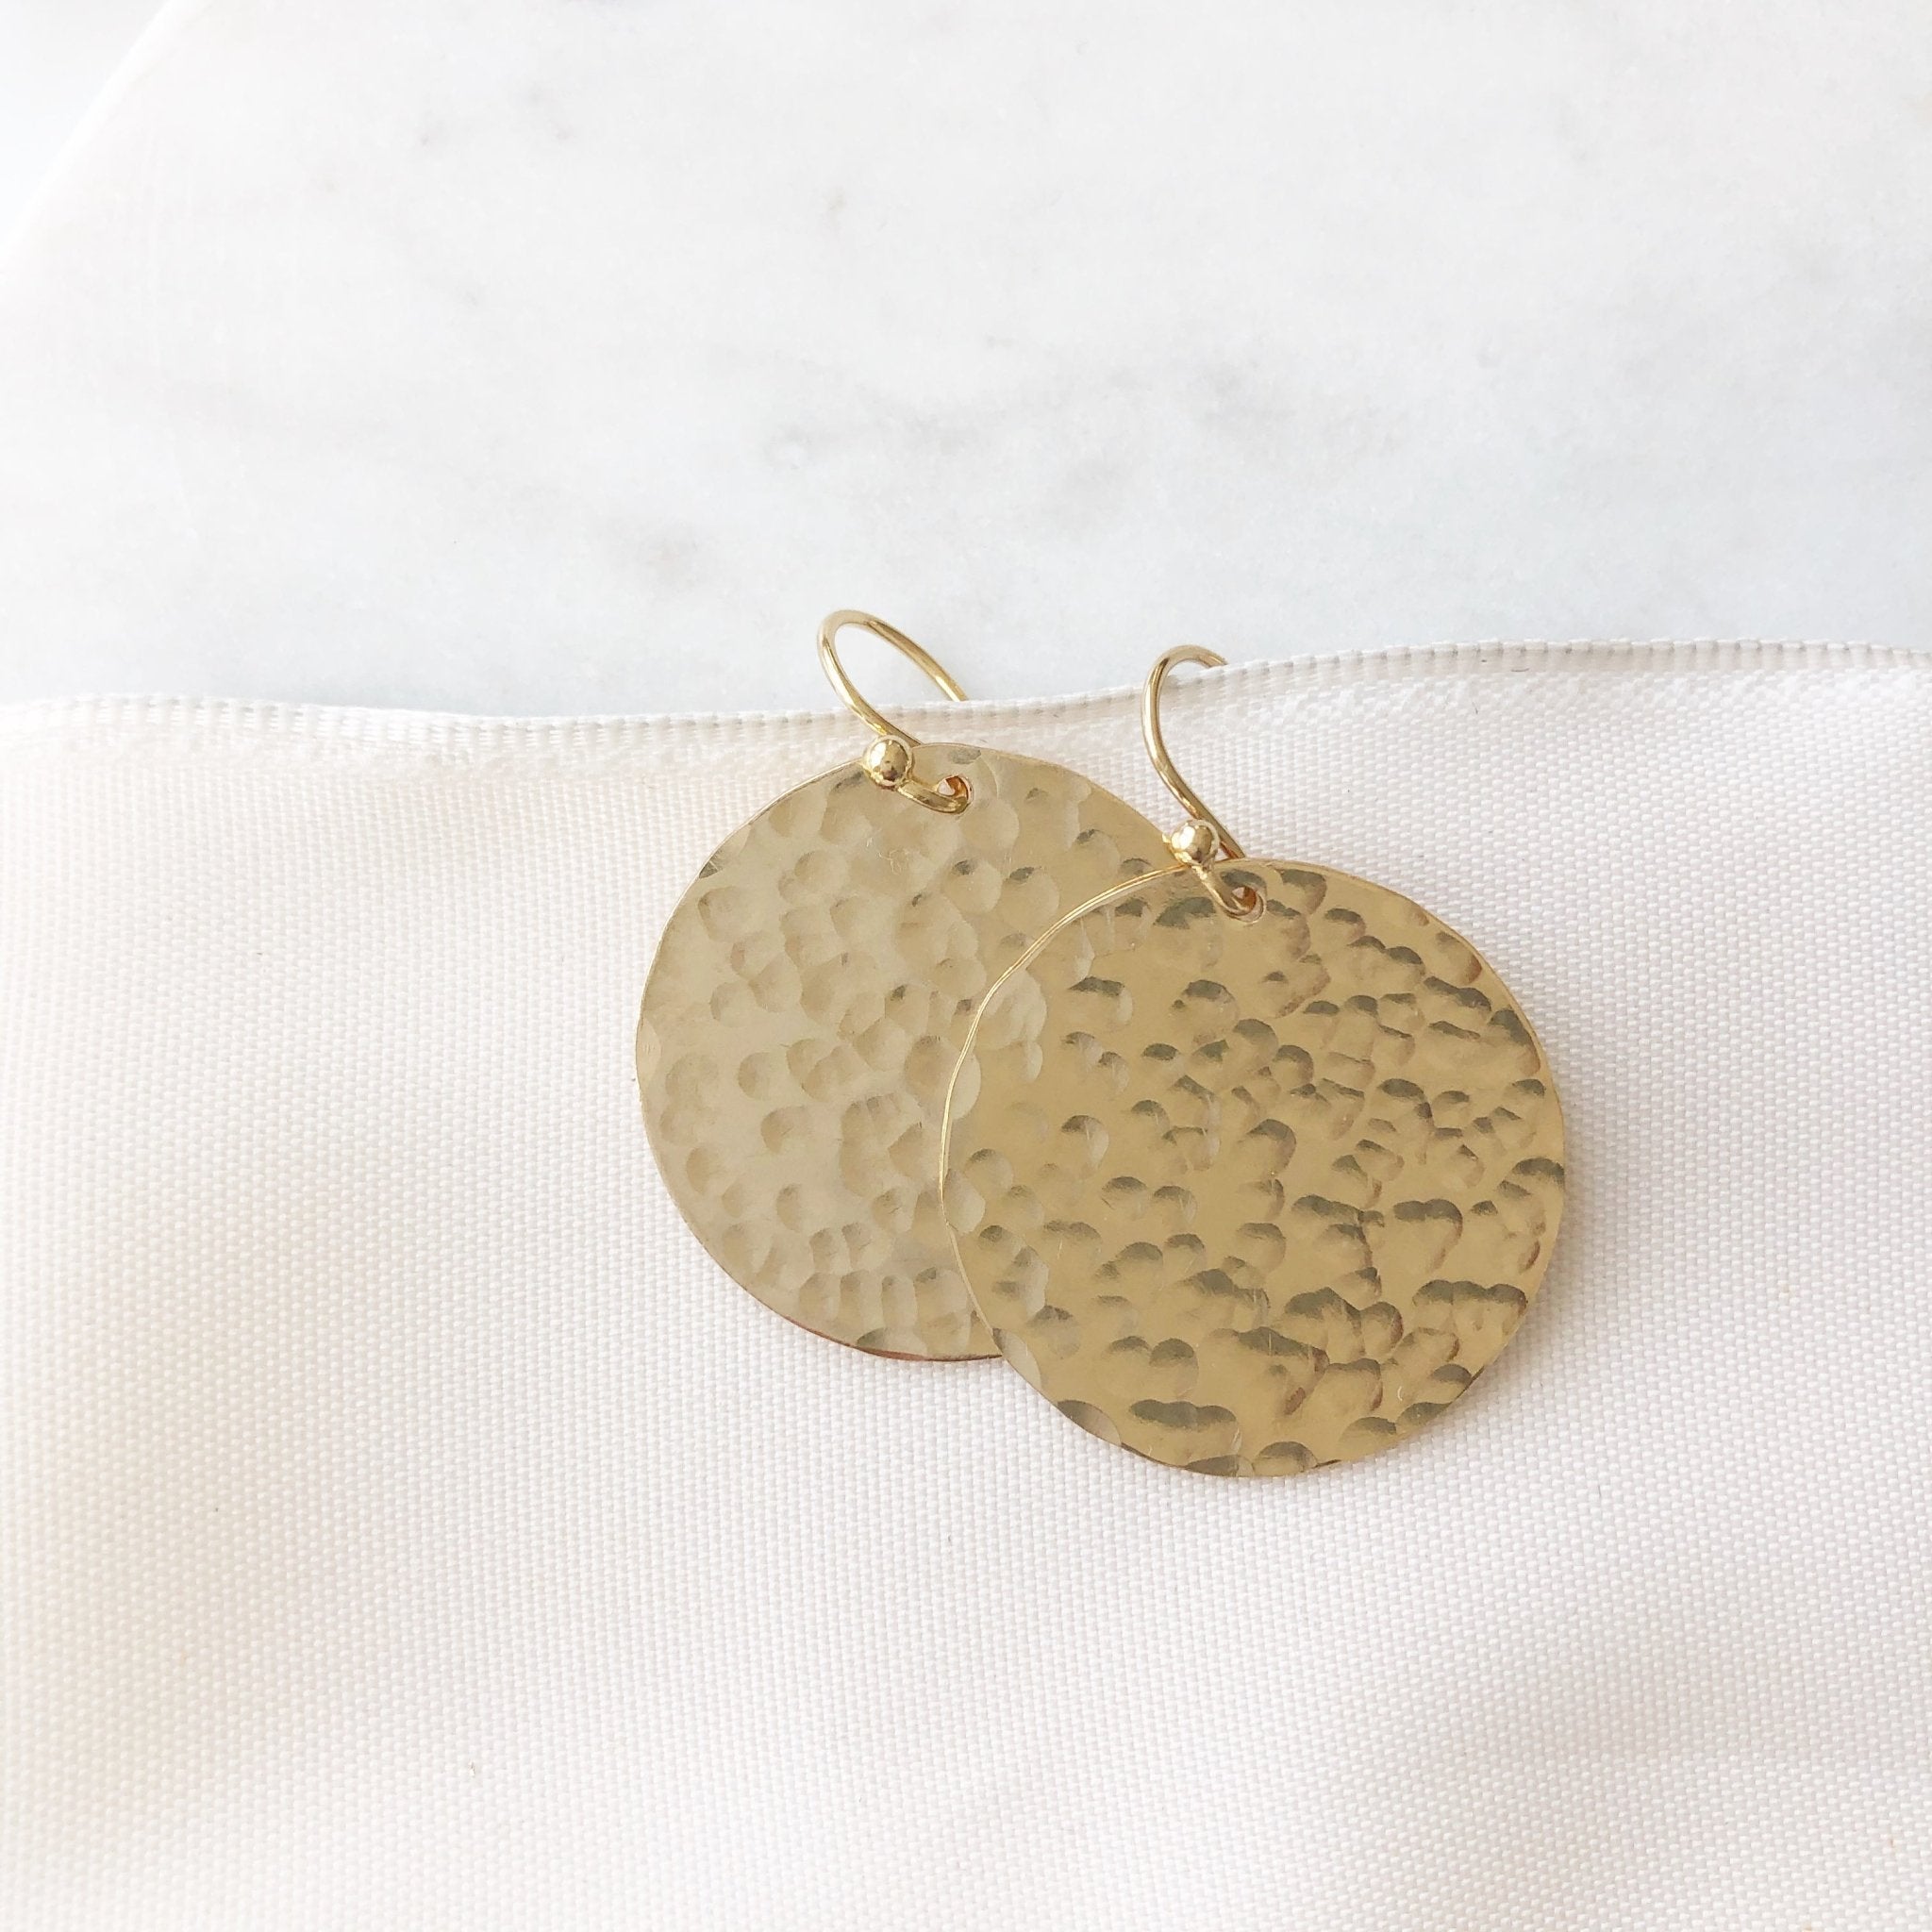 Gold Buffay Earrings by Sarah Cornwell Jewelry.  Lightweight, shimmery, textured 1 inch gold disc earrings on a white background.